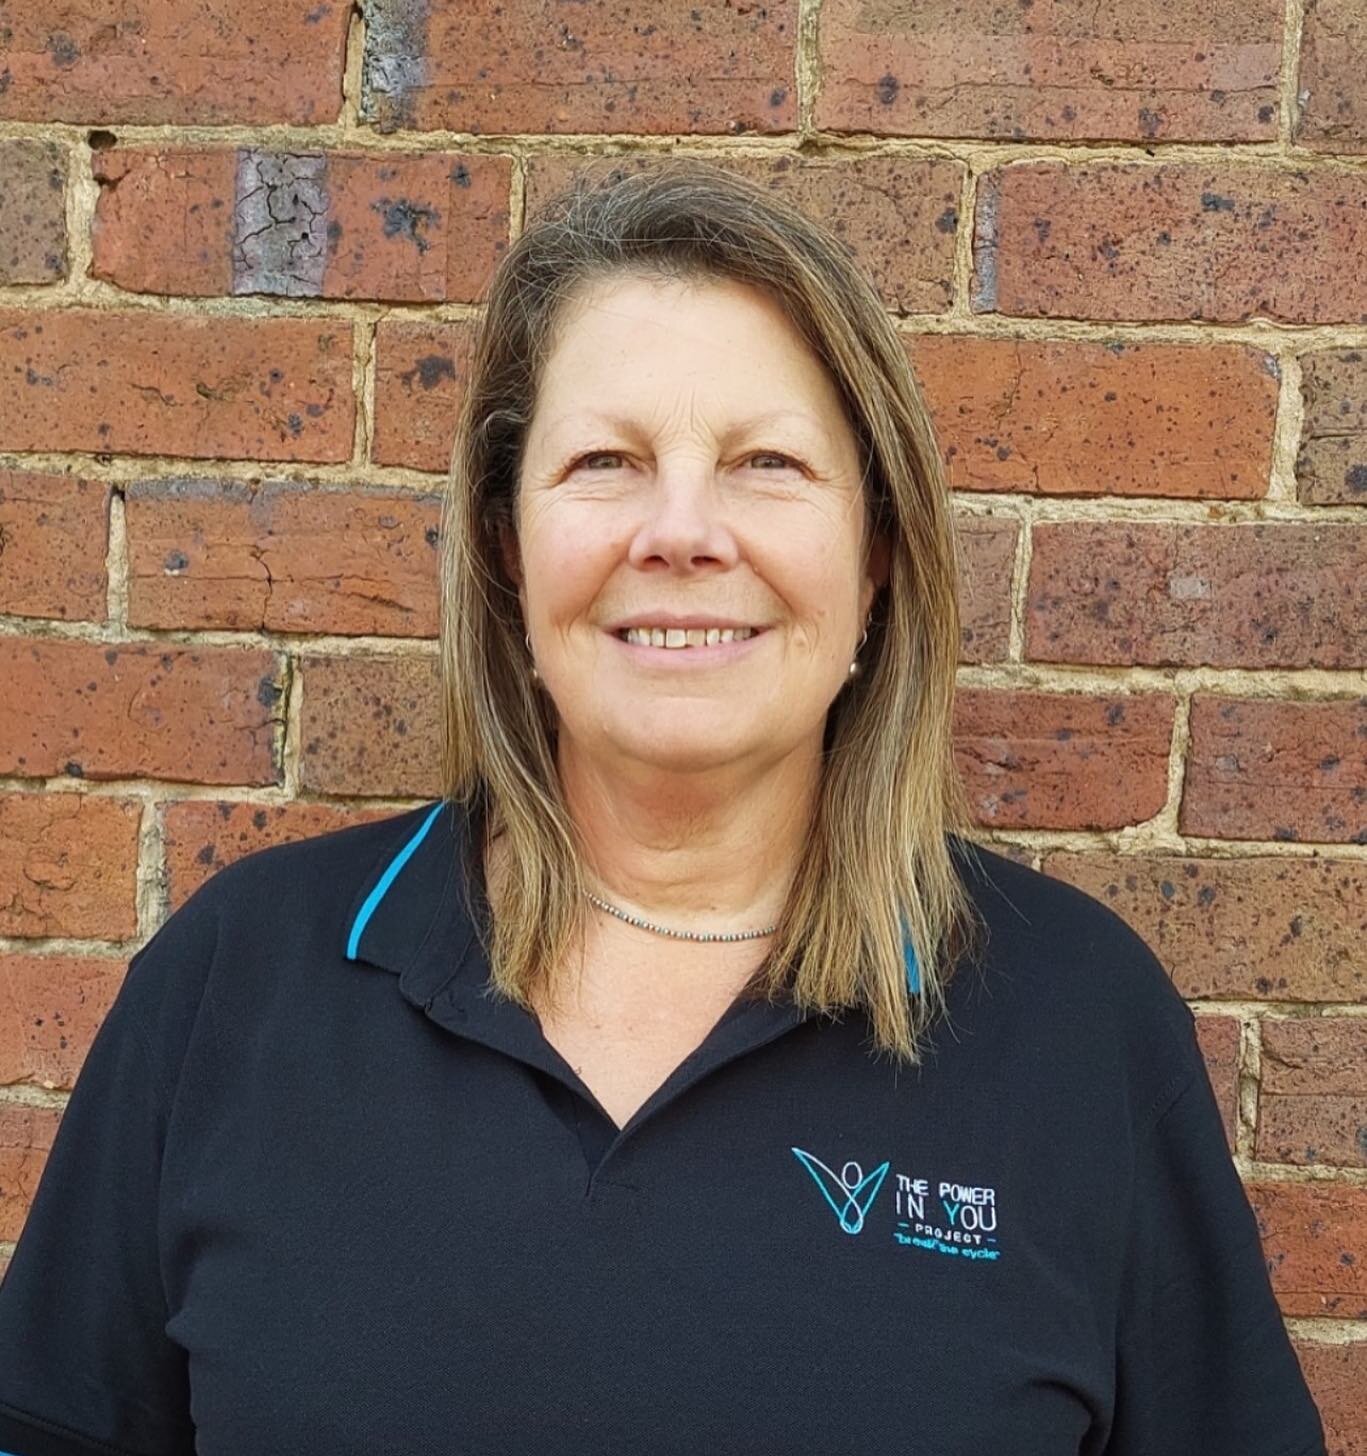 𝗠𝗘𝗘𝗧 𝗧𝗛𝗘 𝗧𝗘𝗔𝗠: 𝗟𝗜𝗦𝗔 👋🏼

Lisa spent a large part of the last 2.5 years accompanying her client to PIYP and was always impressed with the organisation. 

She began working here at the start of the year whilst also finishing a Diploma i